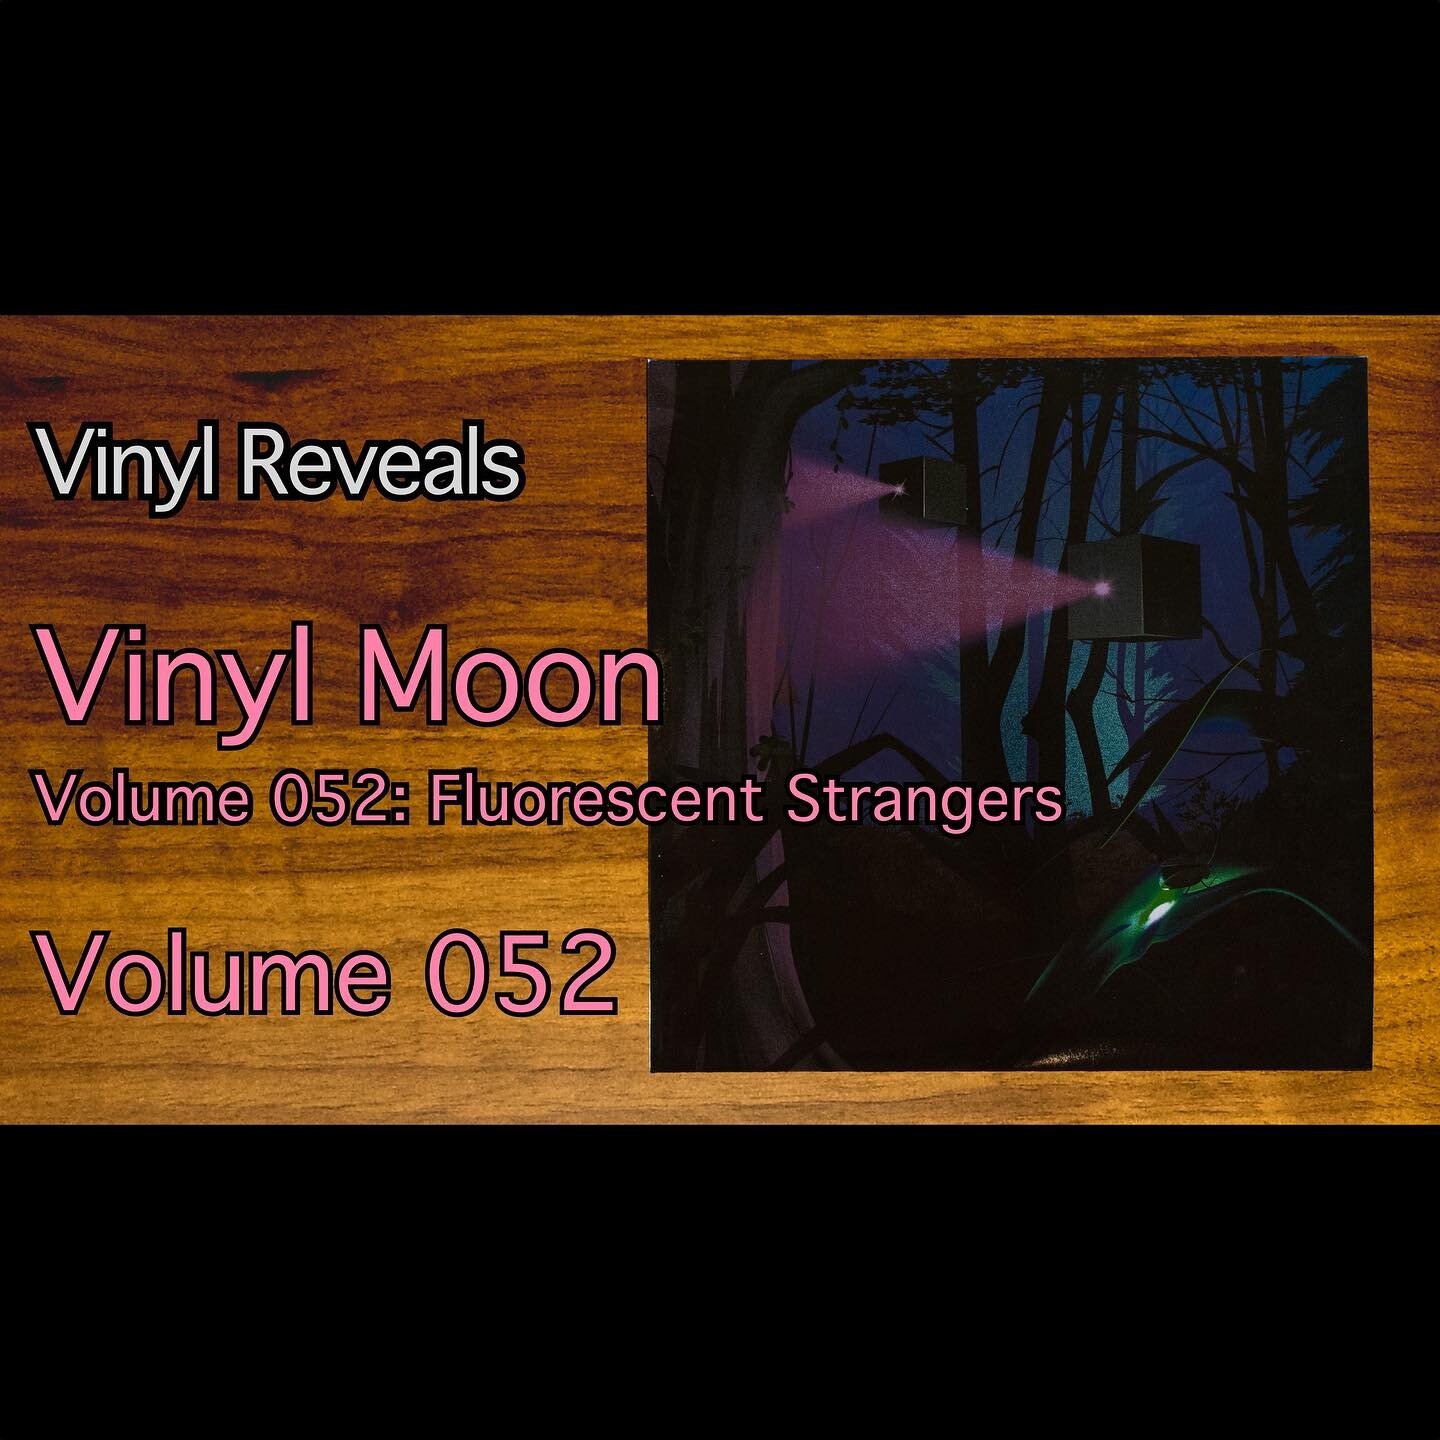 Today we are looking at Vinyl Moon Volume 052: Fluorescent Strangers. Video is now live on the Vinyl Reveals YouTube channel. Link in profile.

#vinylReveal #vinyl #vinylcollection #vinylrecords #records #vinylReveals #vinylcommunity @vinylmoonco